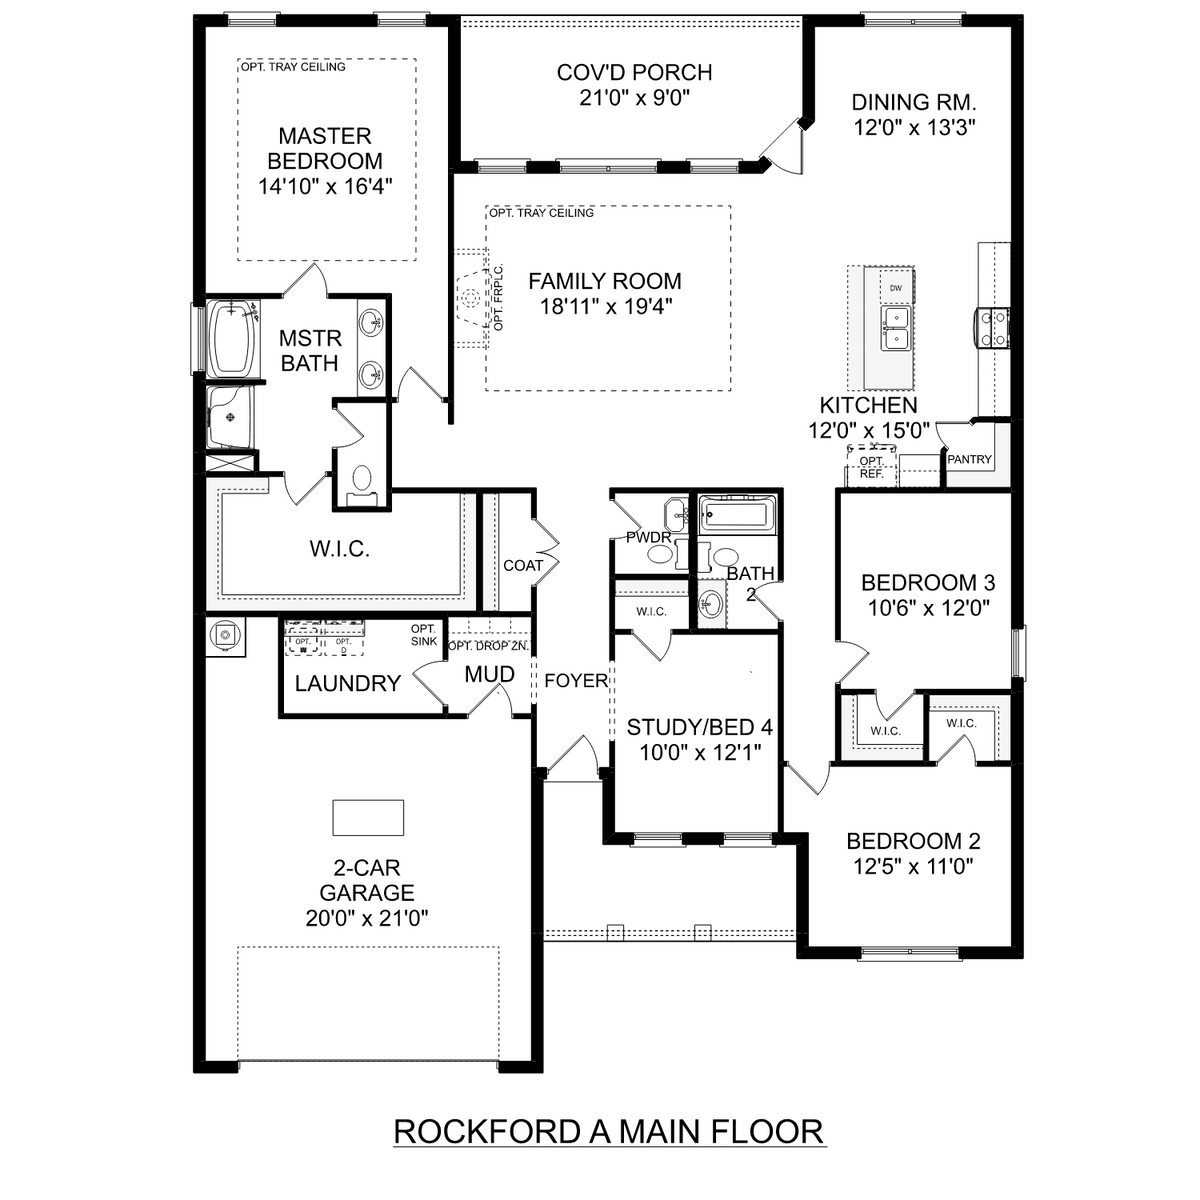 1 - The Rockford buildable floor plan layout in Davidson Homes' North Ridge community.